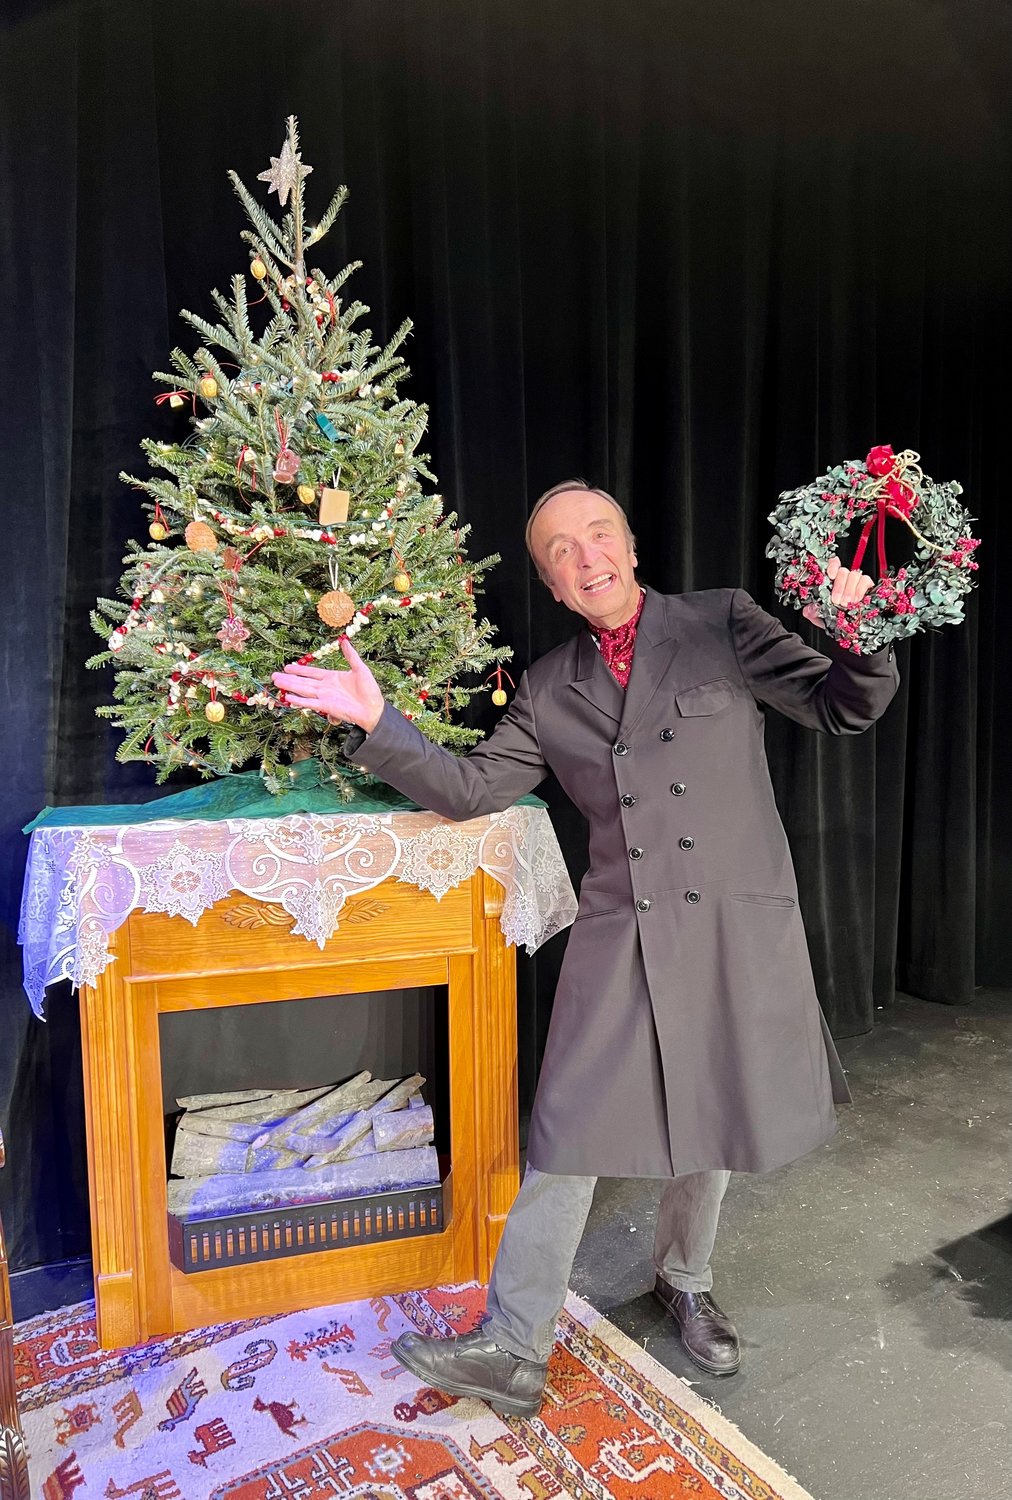 Norman Lewis stars as Dickens, Scrooge, Marley, Bob Cratchit, Tiny Tim and all the other characters in is one-man performance of “A Christmas Carol” at Las Cruces Community Theatre.